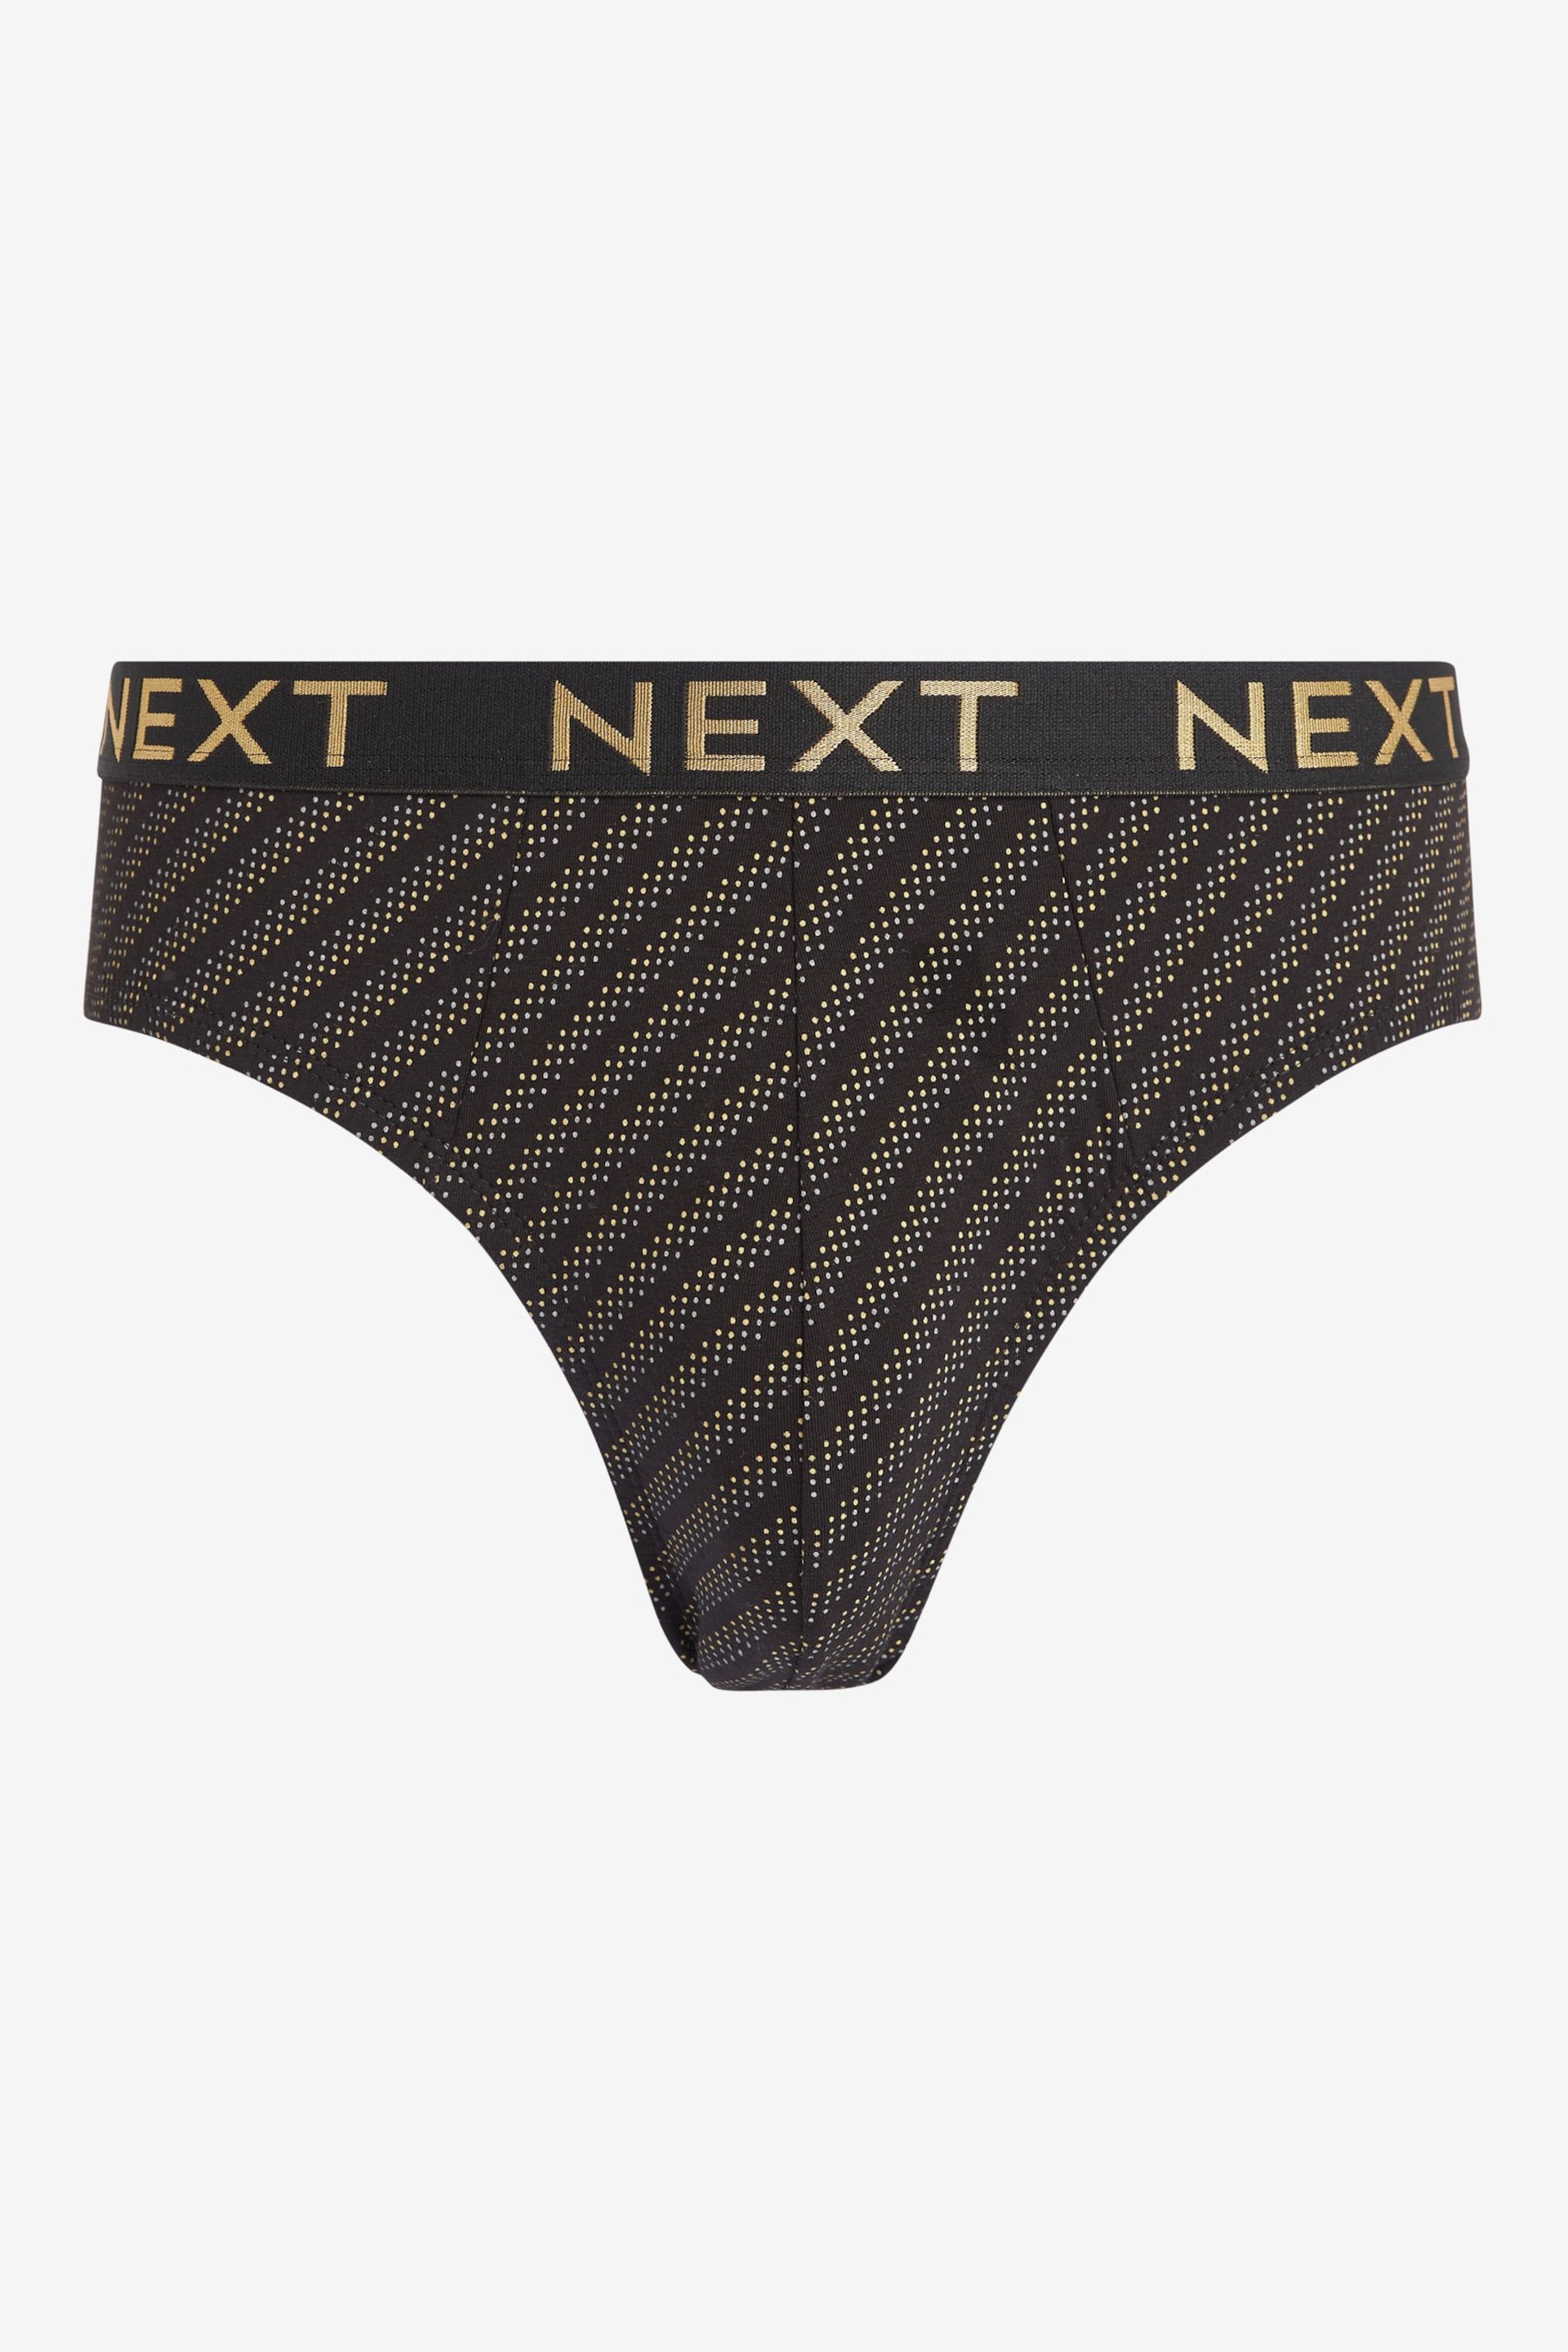 Black Gold Pattern 4 pack Cotton Rich Briefs - Image 8 of 10